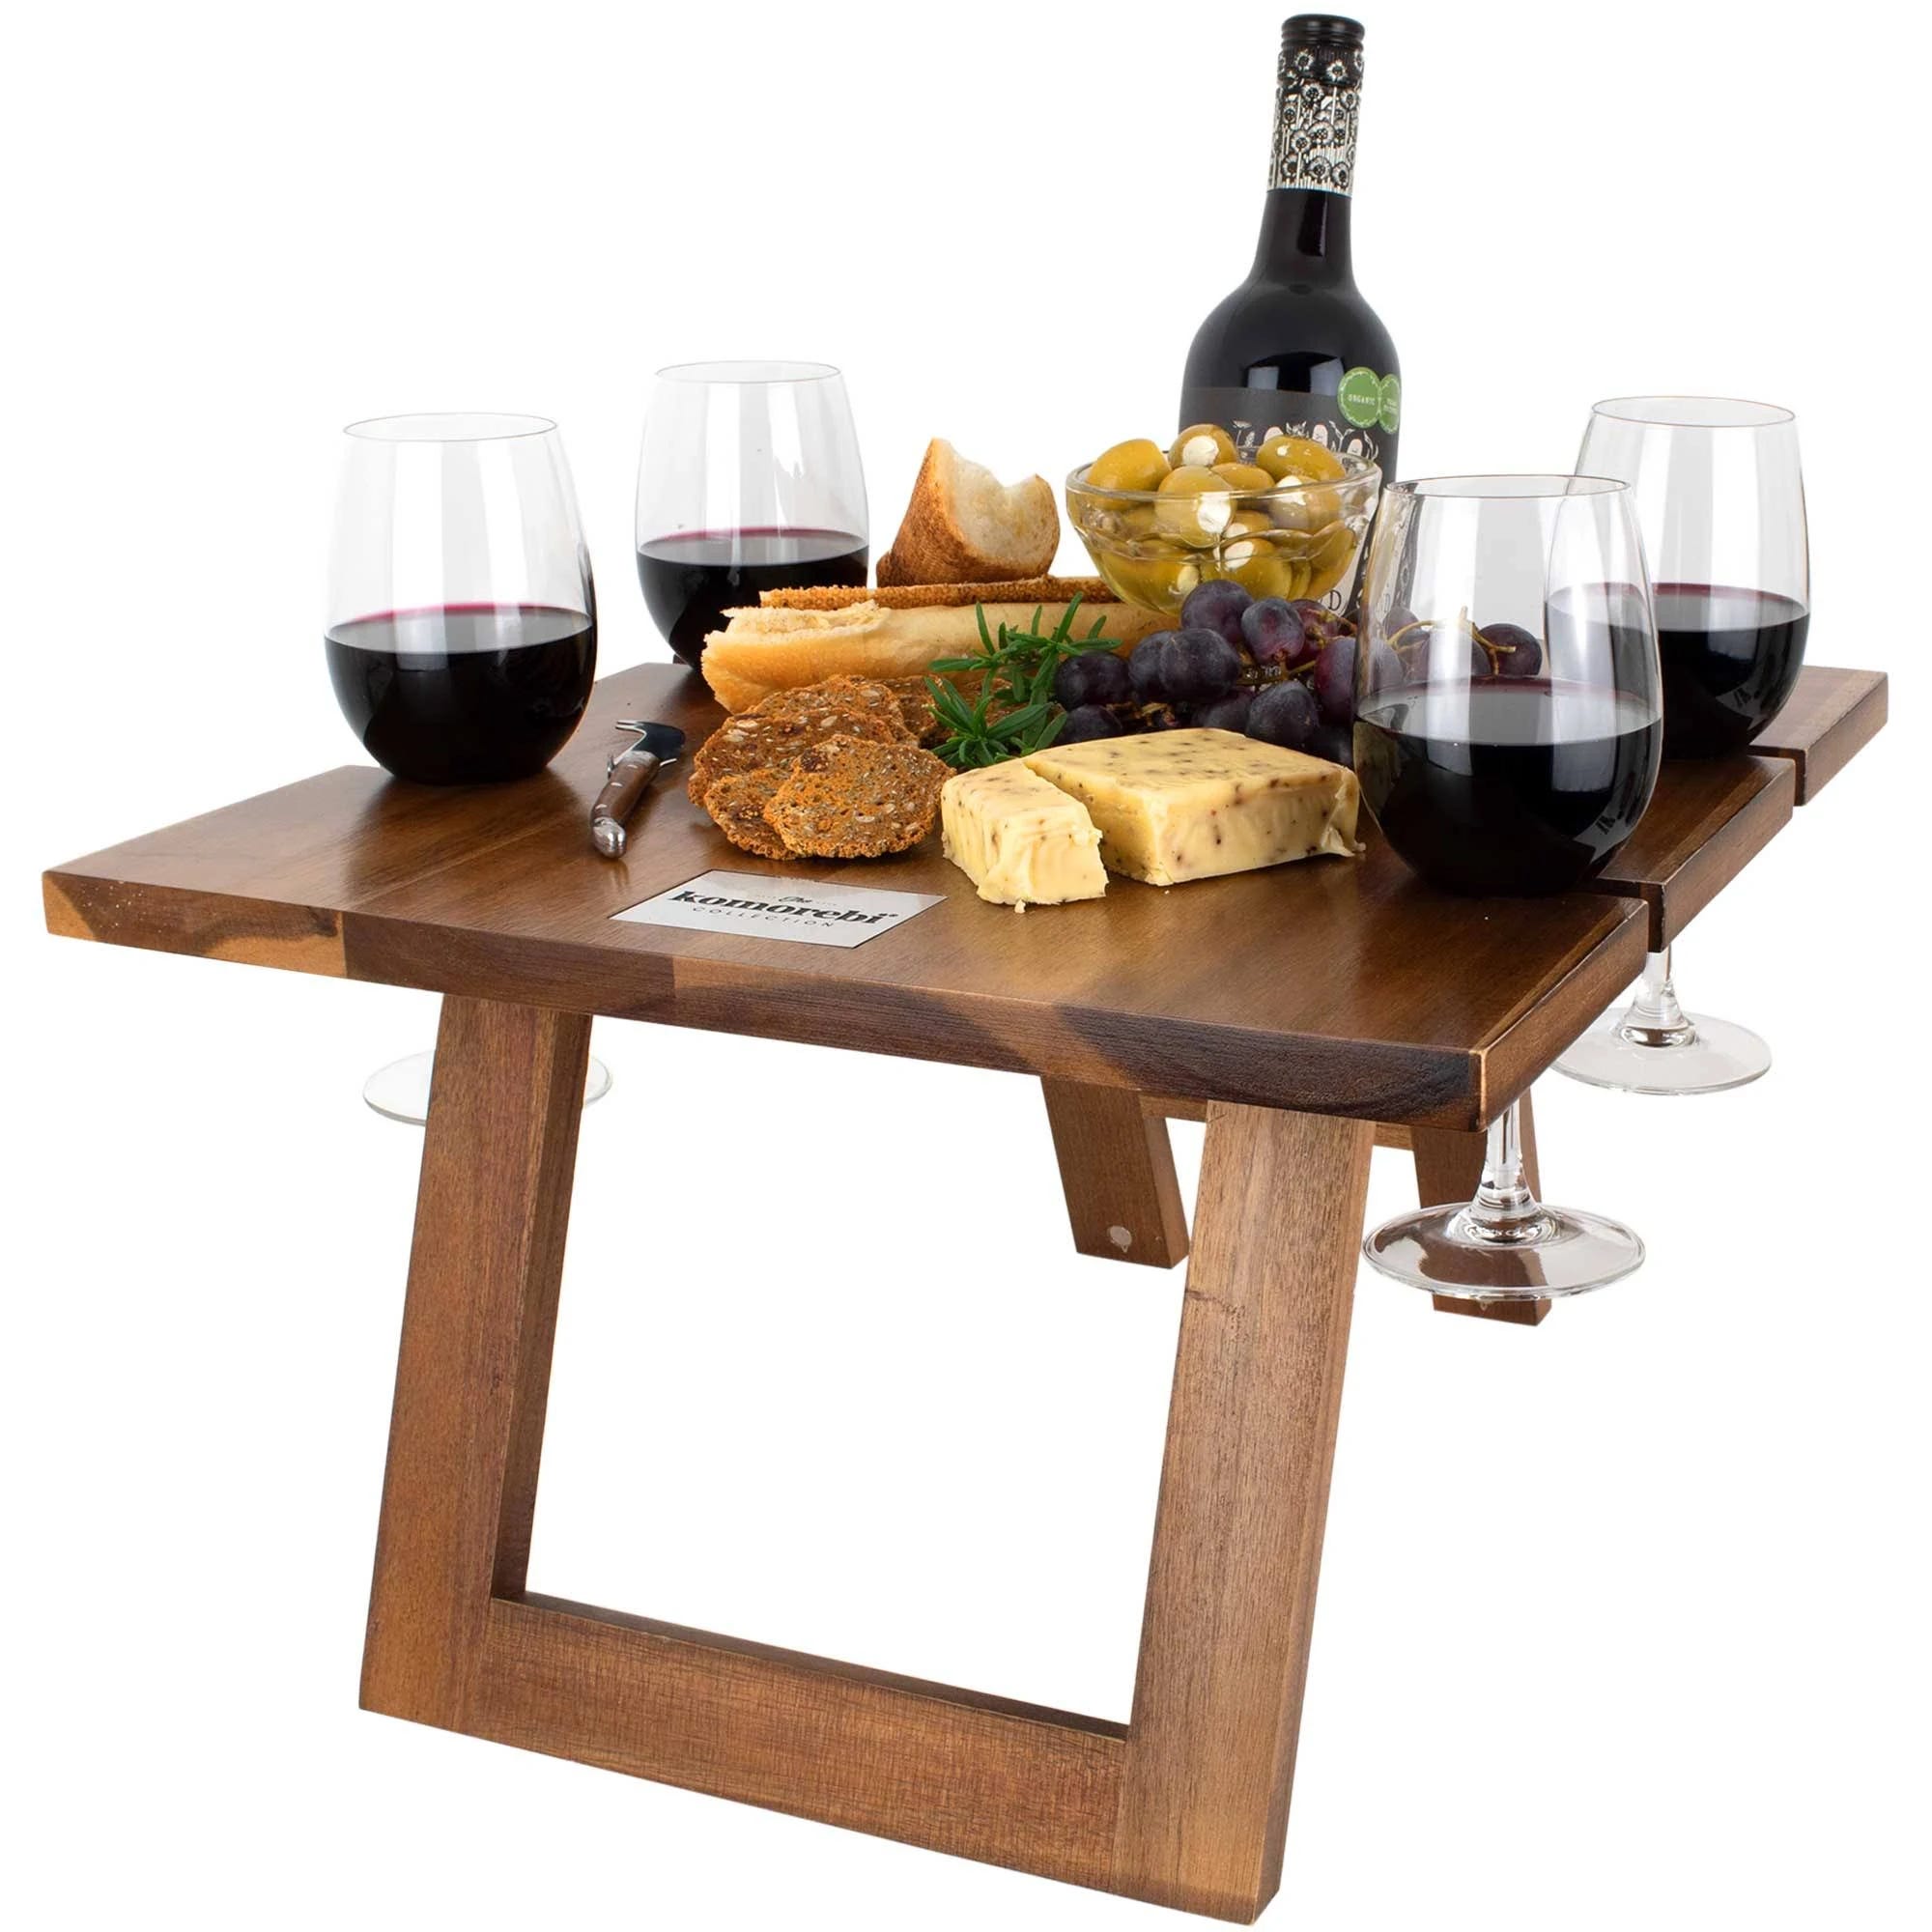 Portable Acacia Wood Picnic Table with Built-in Wine Holder | Image